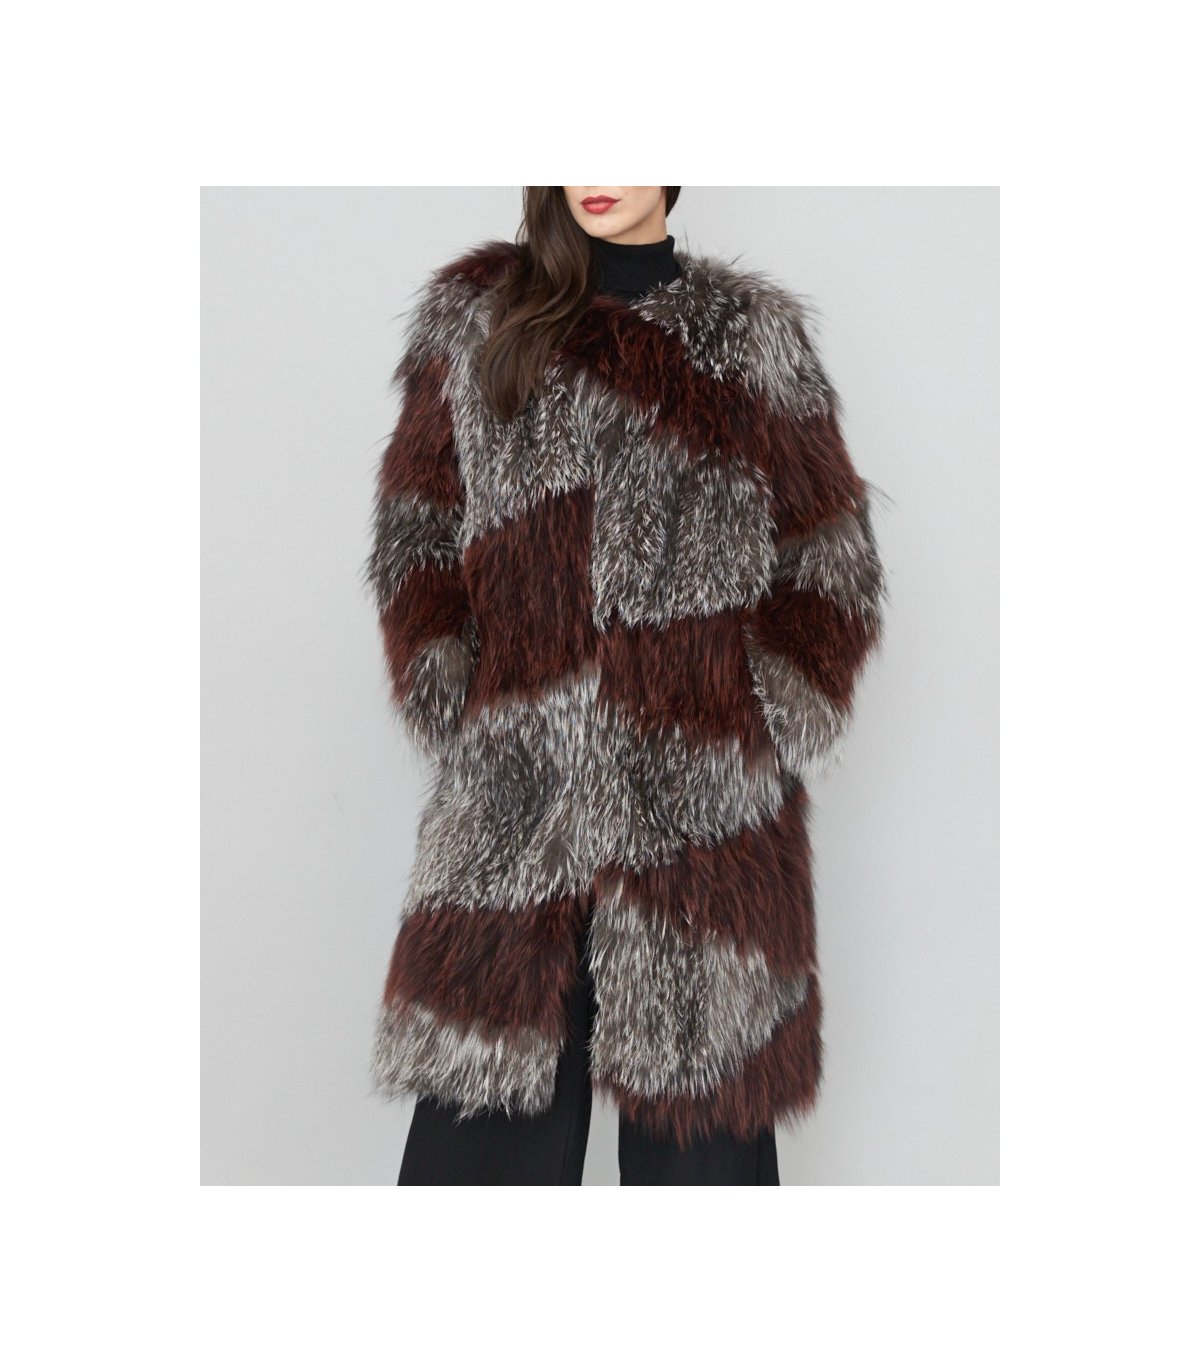 Knitted Fox Fur Long Jacket for Ladies